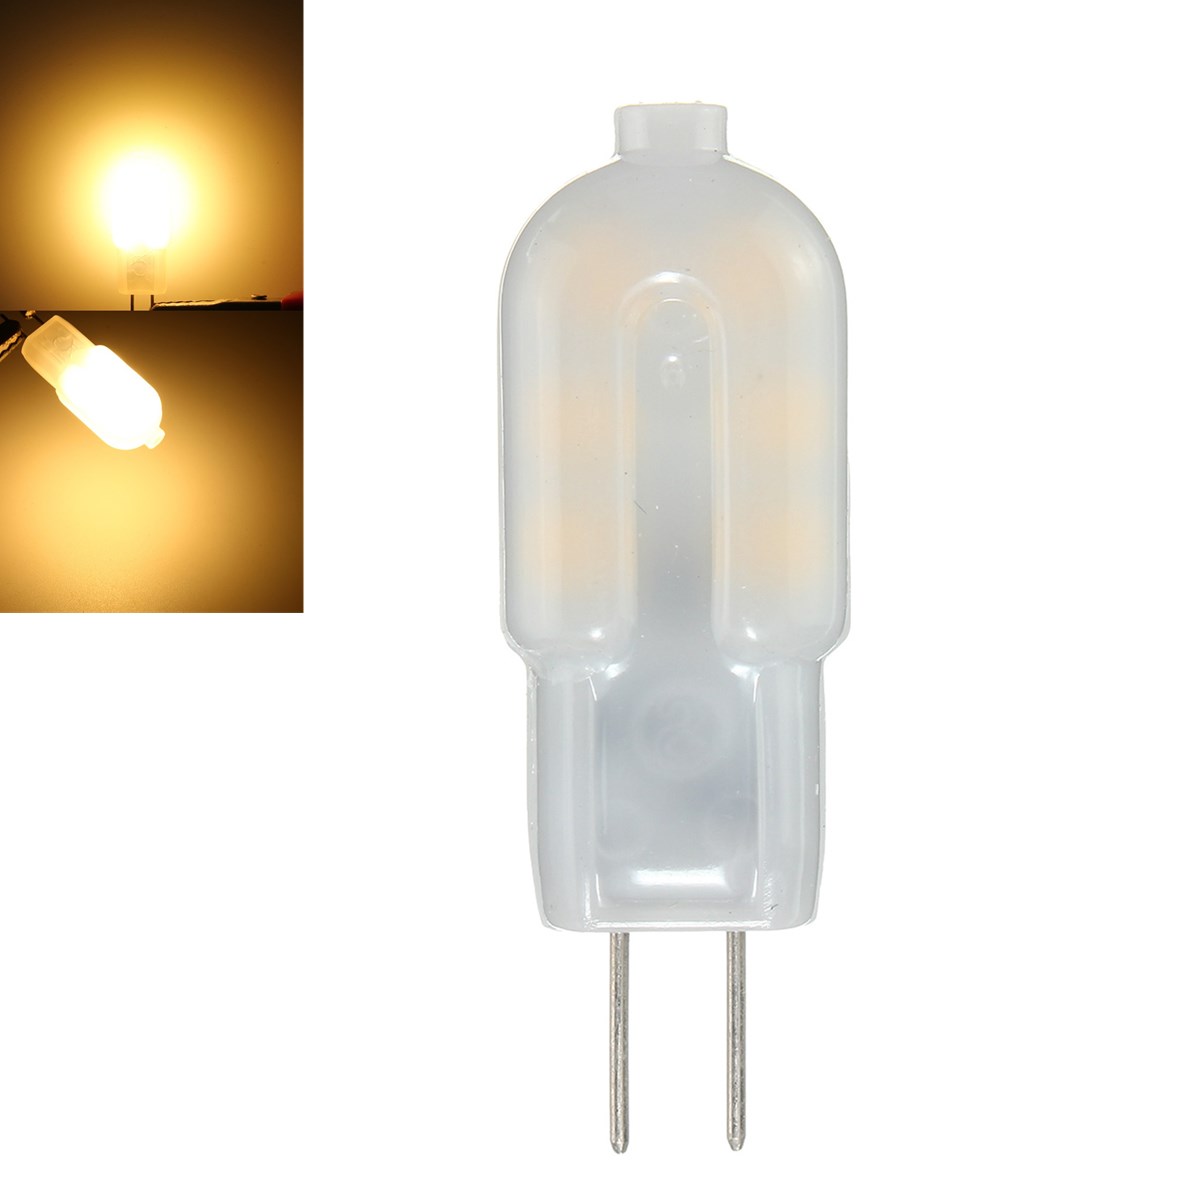 

10PCS DC12V G4 2W Non-dimmable SMD2835 Warm White LED Light Bulb for Indoor Home Decor